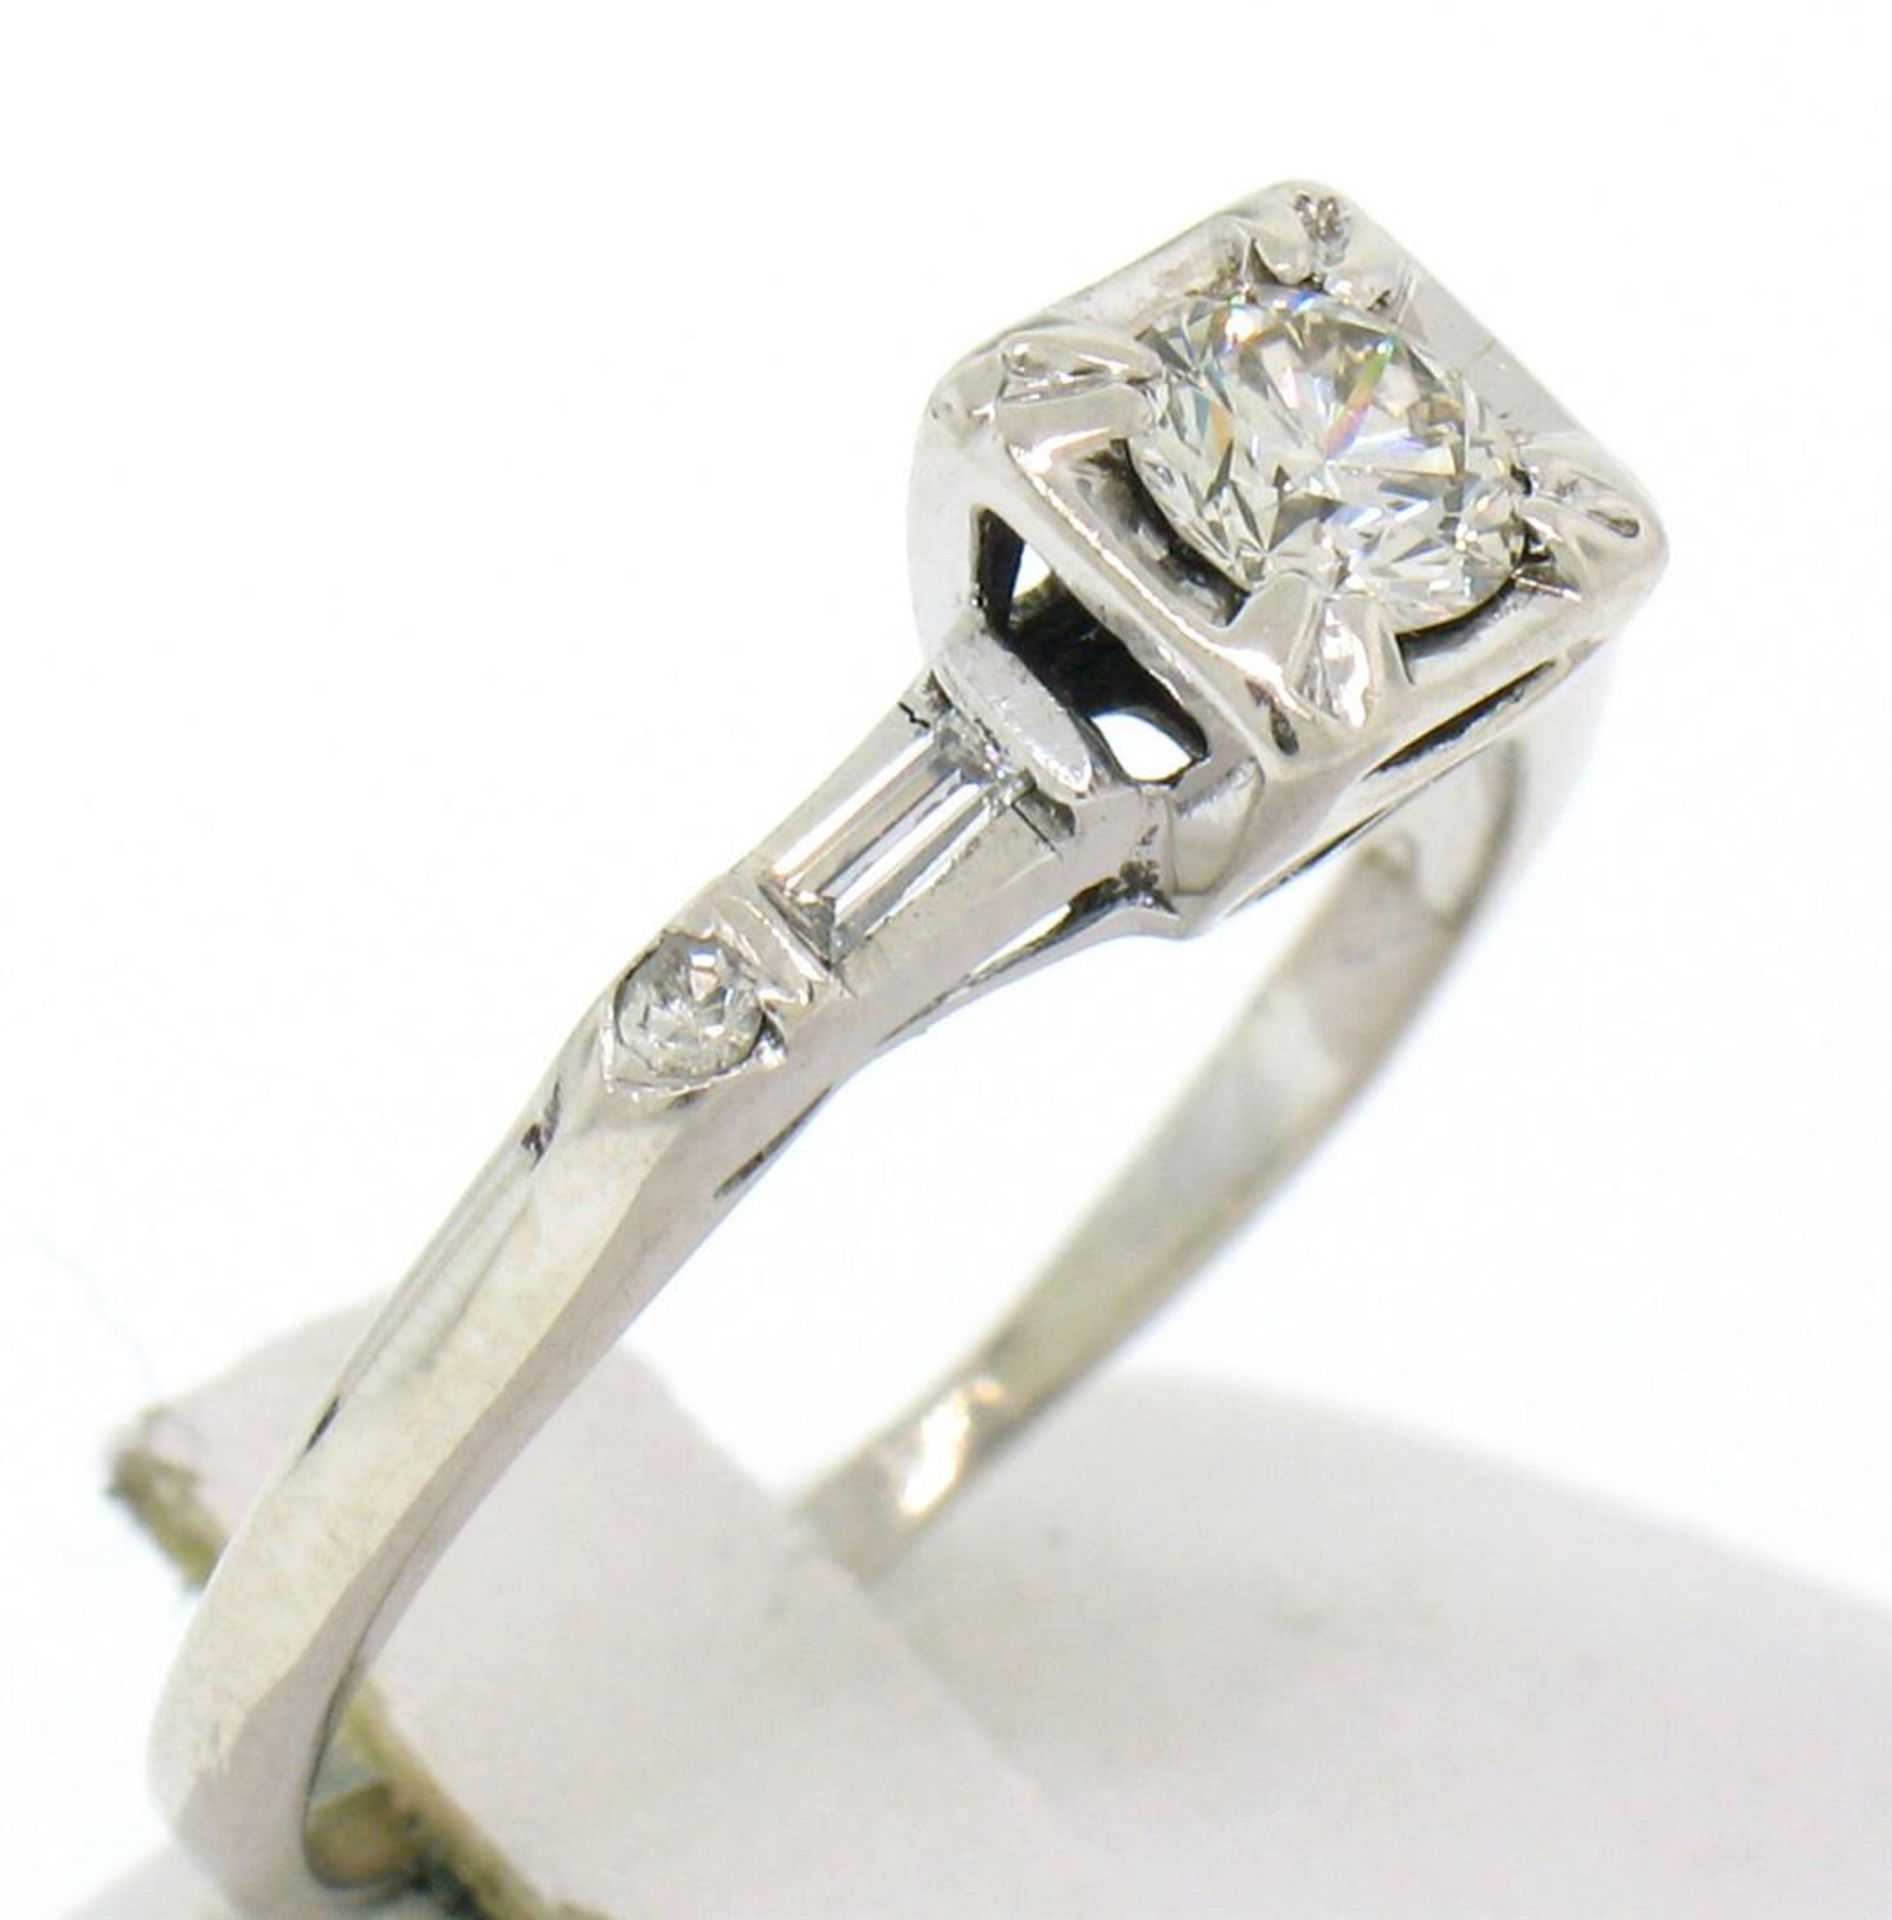 18k White Gold Round & Baguette VVS Diamond Engagement Solitaire Ring - Image 3 of 4